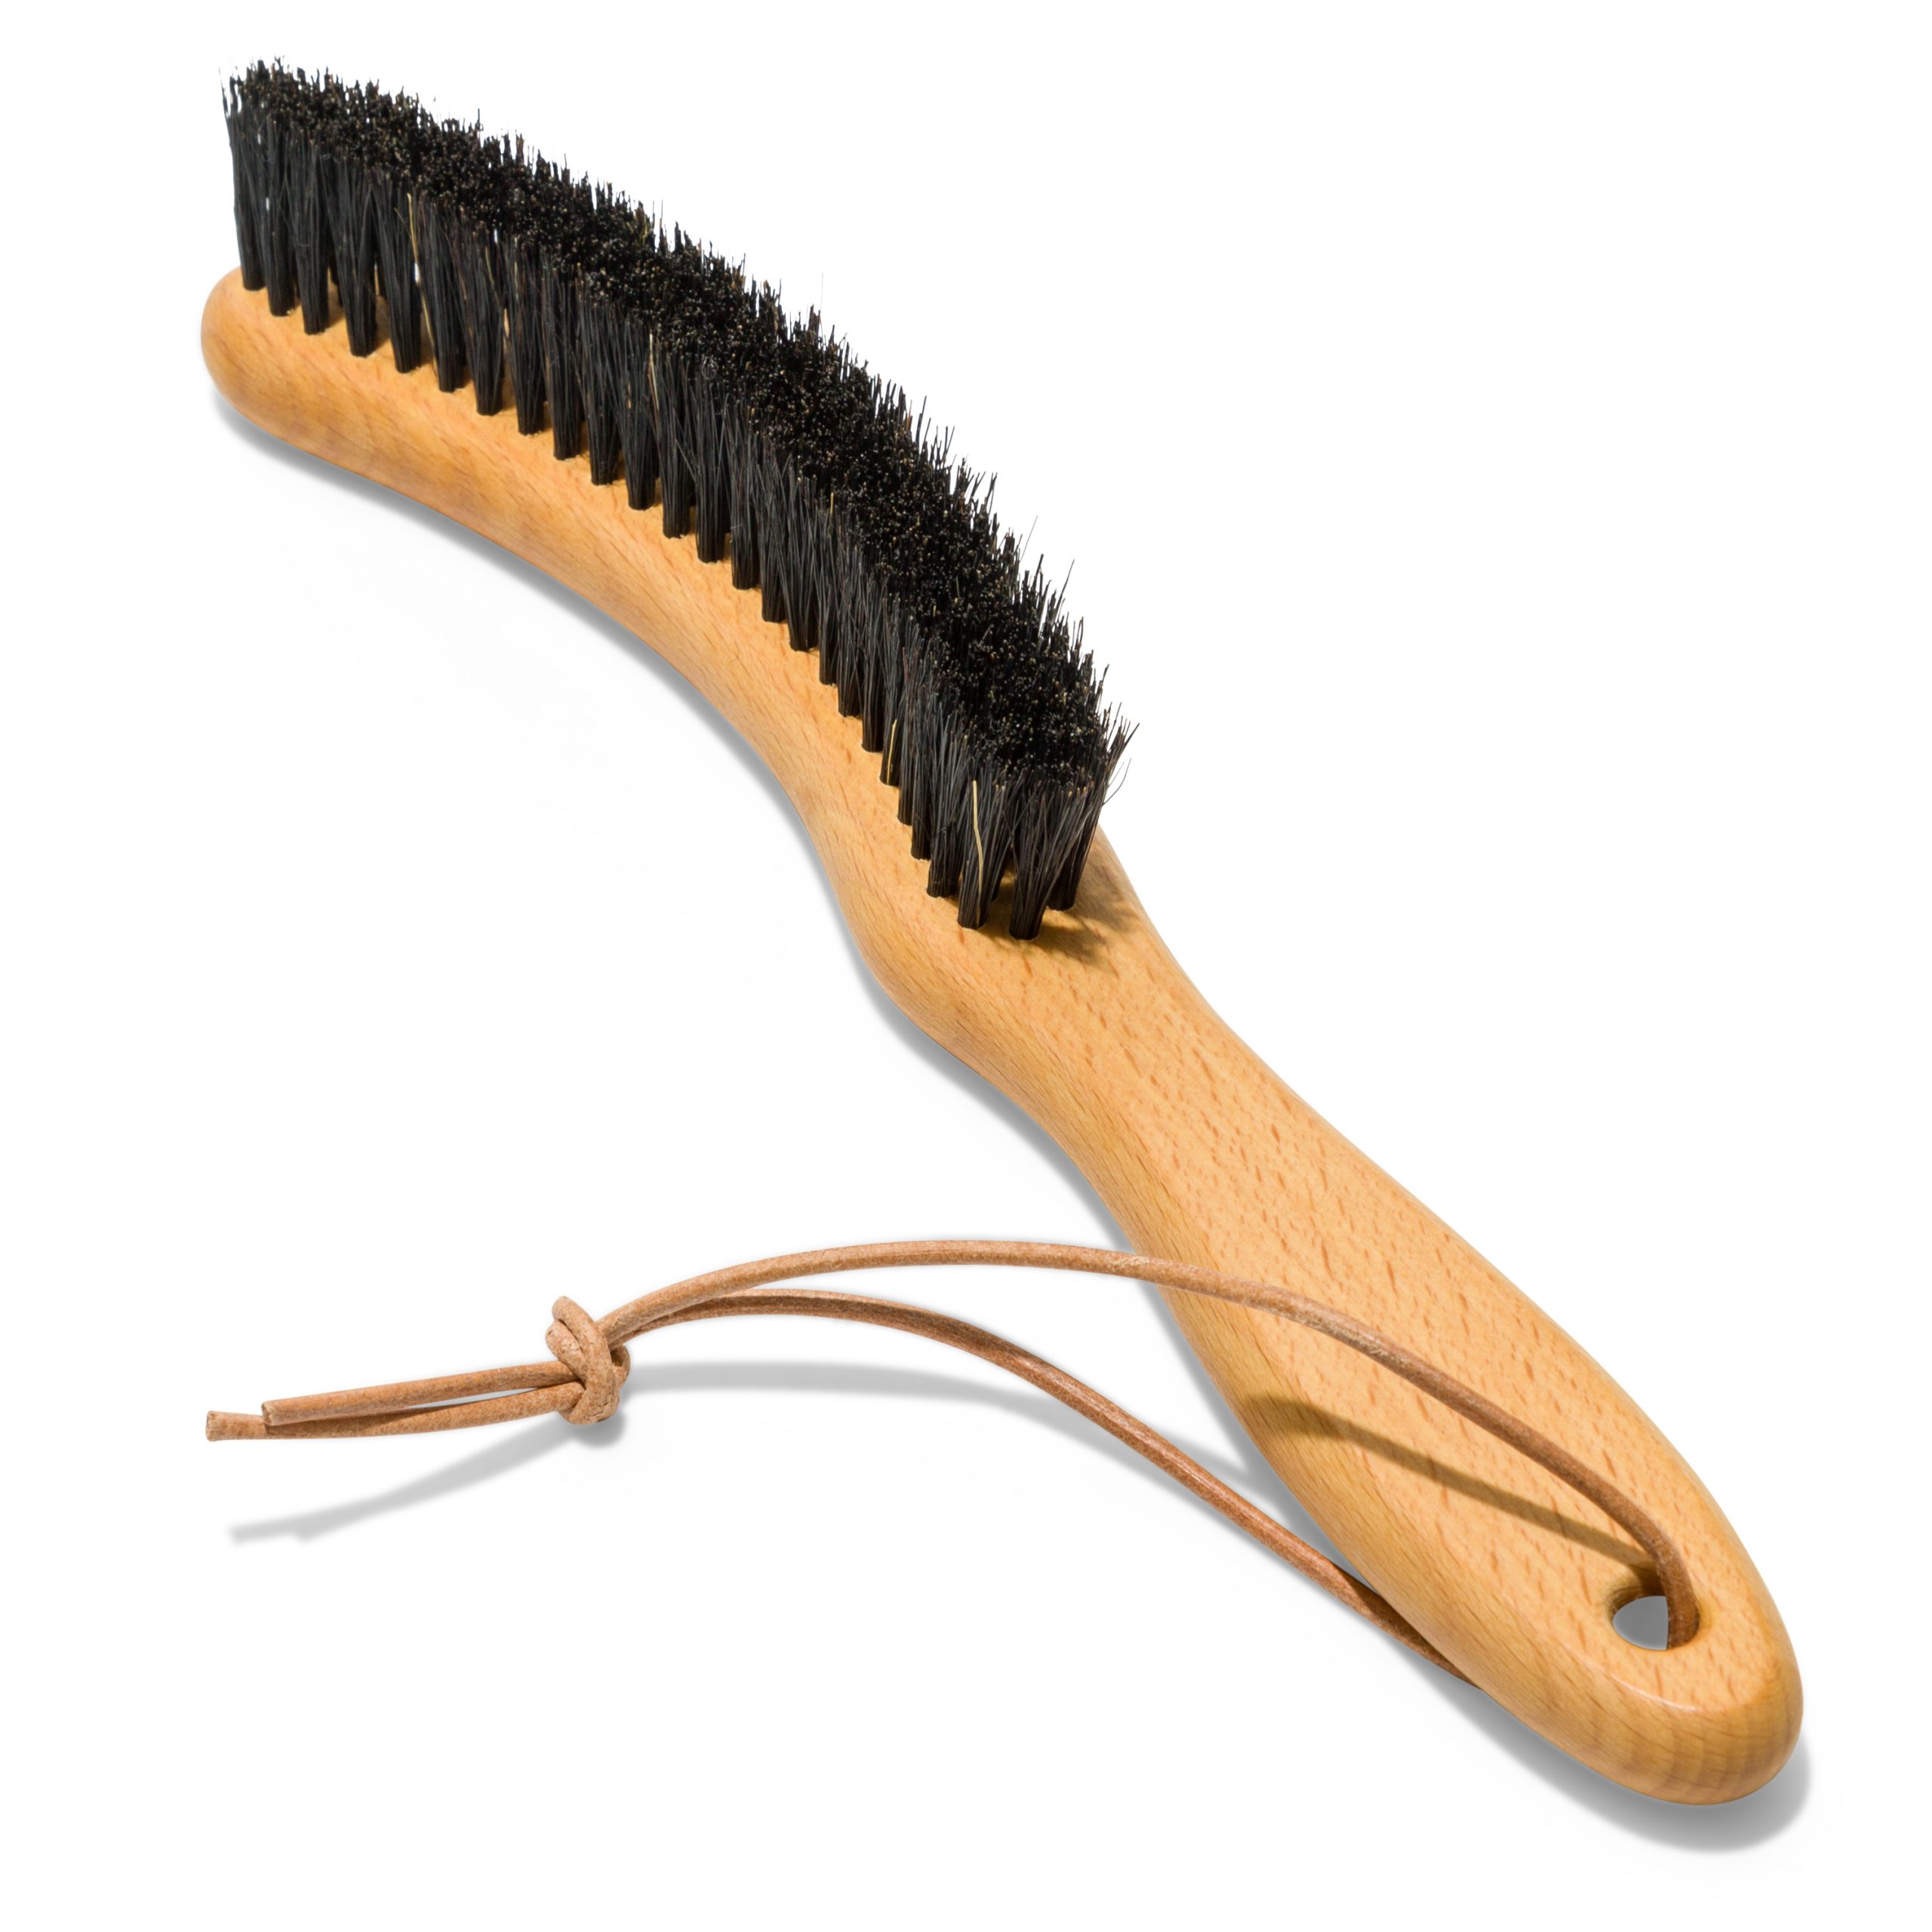 100% Natural Soft Horsehair Hat Brush - Refresh Your Hats